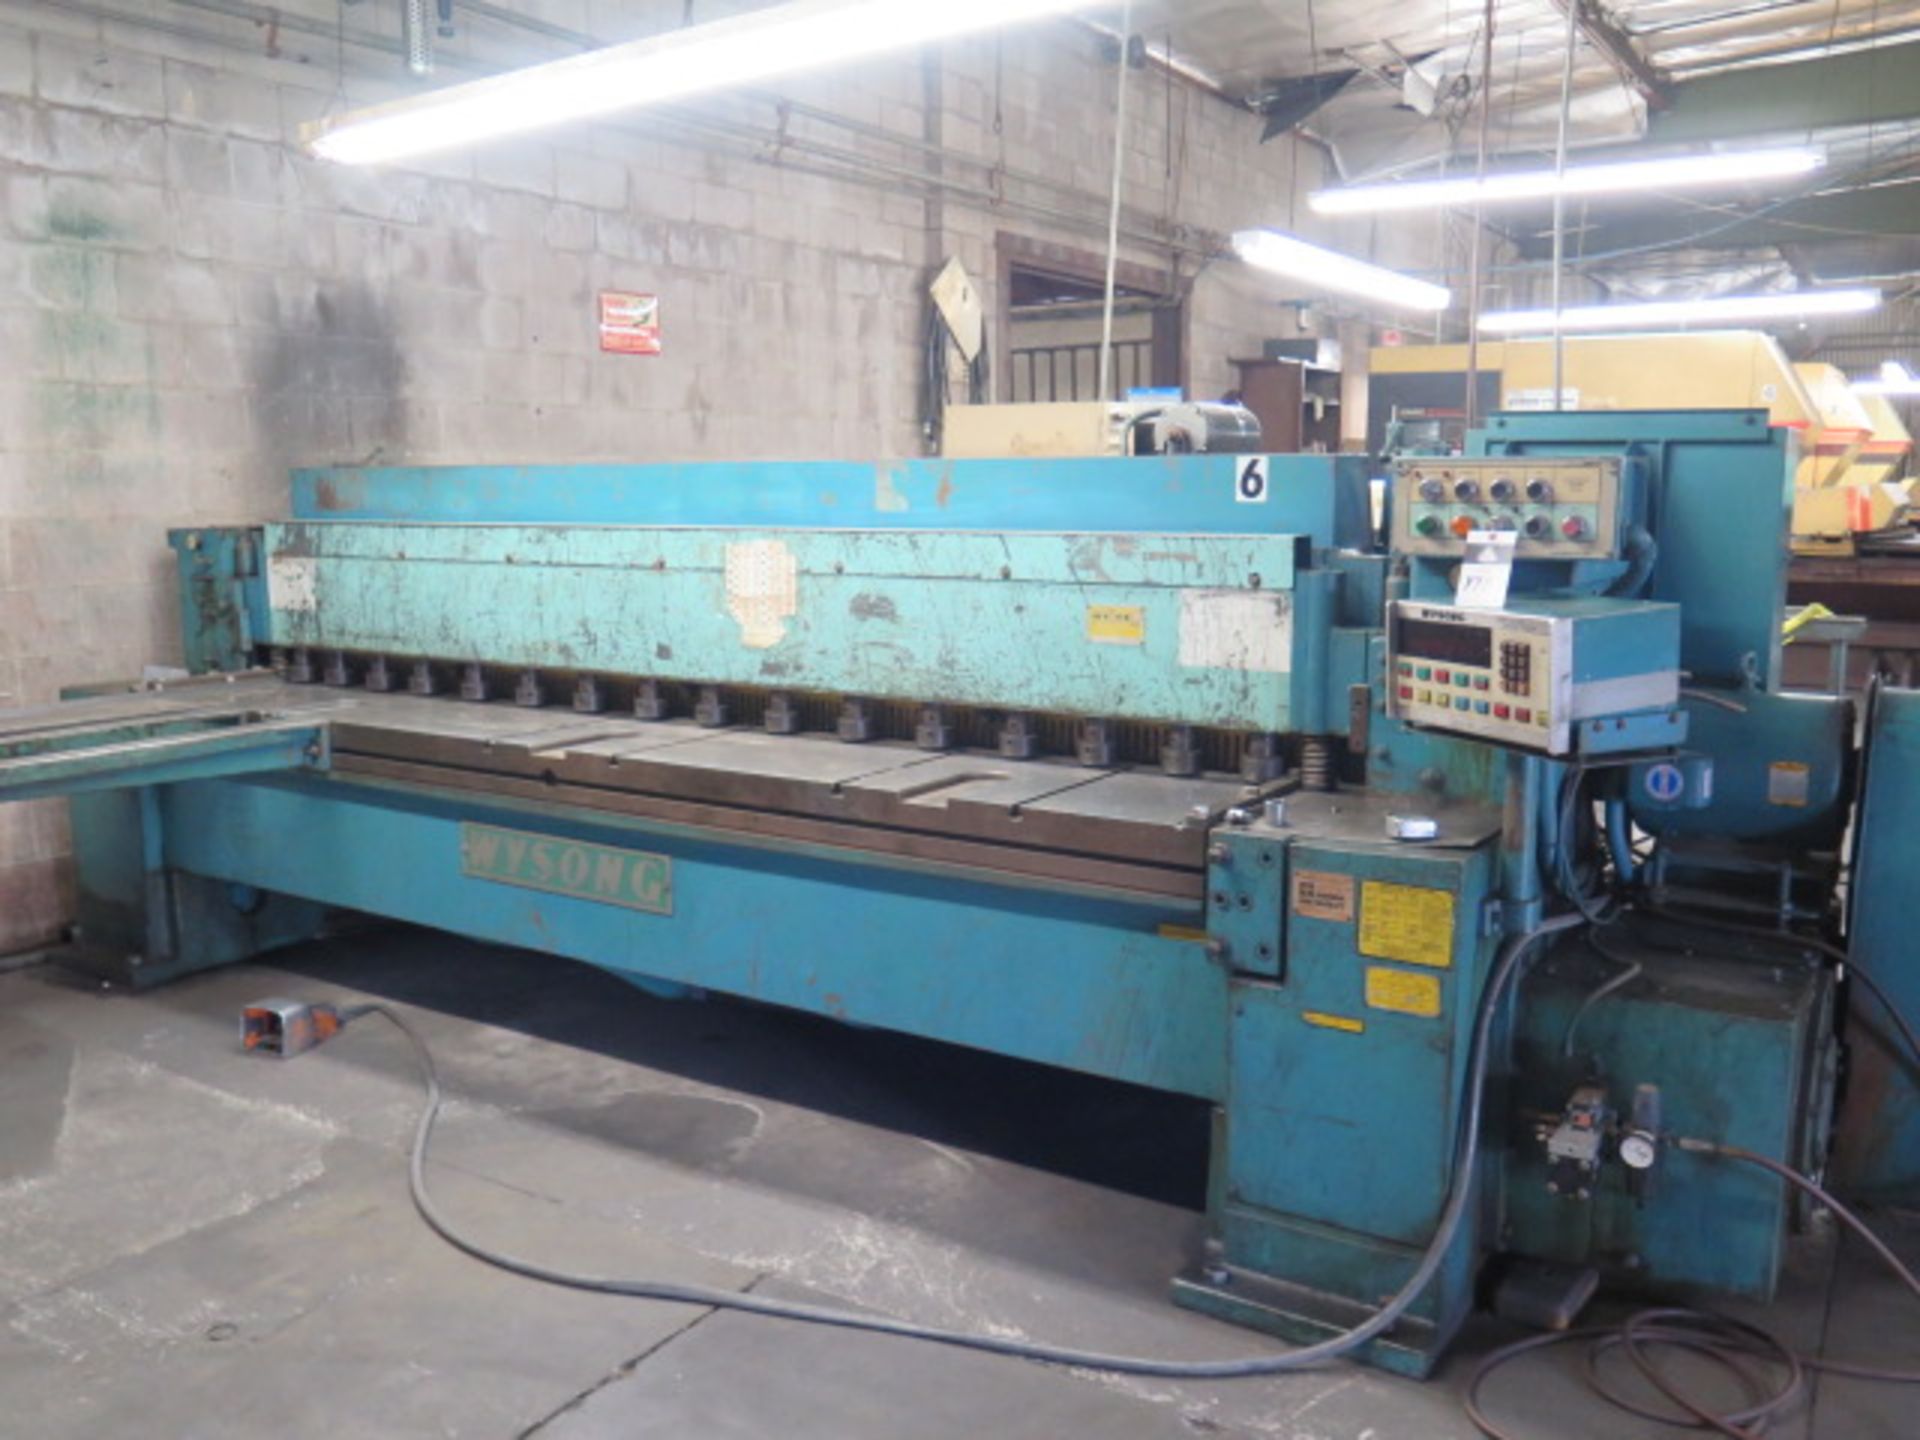 Wysong mdl. 1025 ¼” x 122” Power Shear w/ Wysong Controls and Back Gauging, 128” Sq Arm, SOLD AS IS - Image 10 of 10